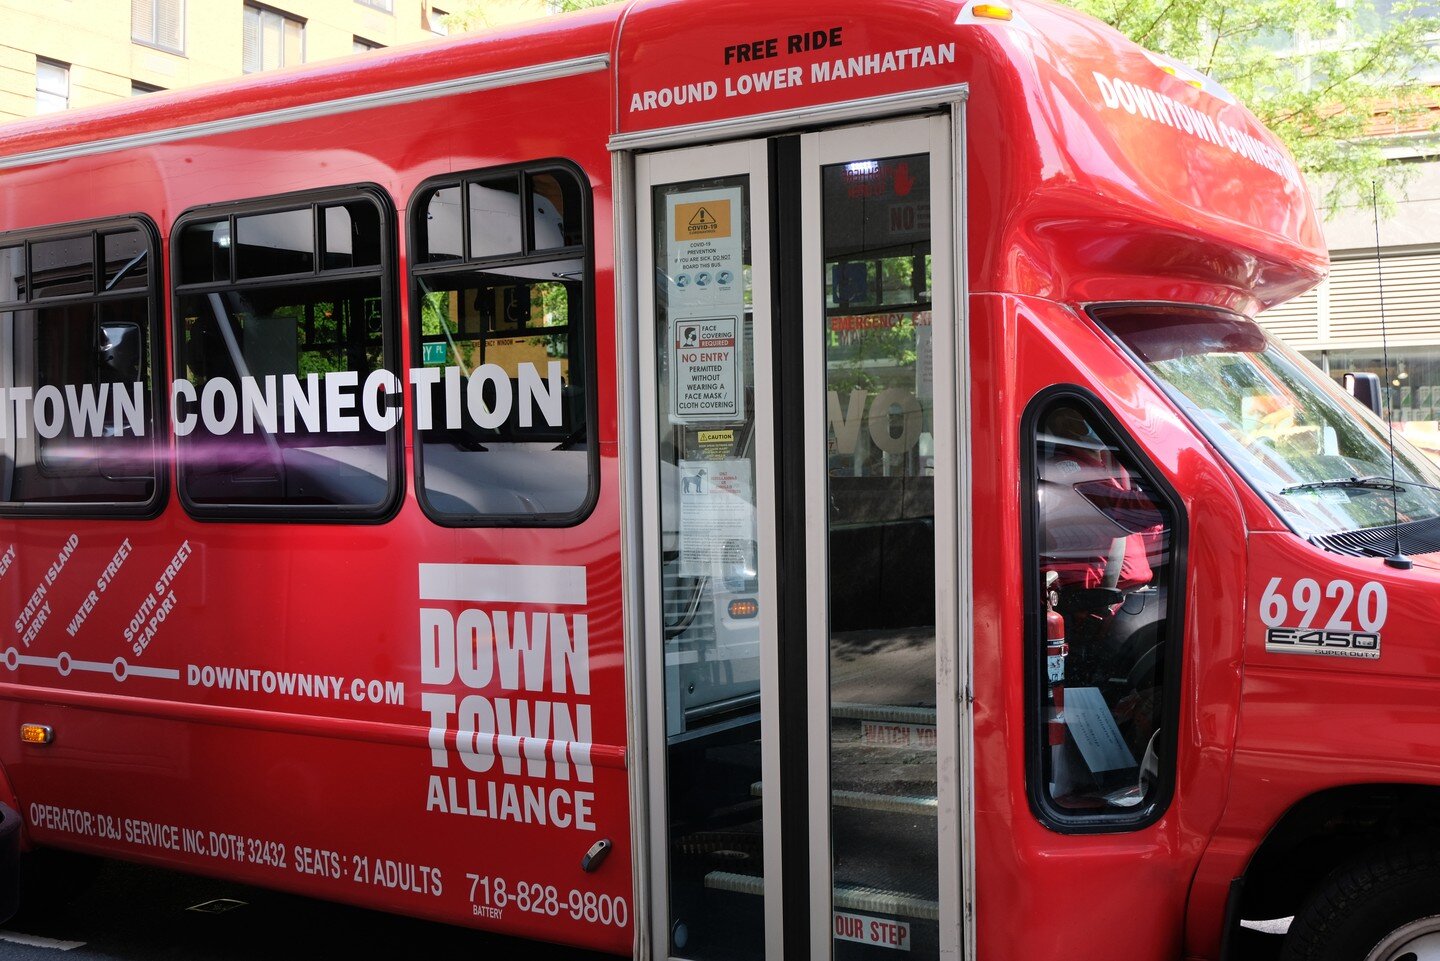 Catch a ride 🚌 with the Downtown Alliance Connection Bus, a free circulator transportation service for the Lower Manhattan area!

With easy access to subway lines, bus routes and ferries, the Downtown Connection is the most convenient way to explore